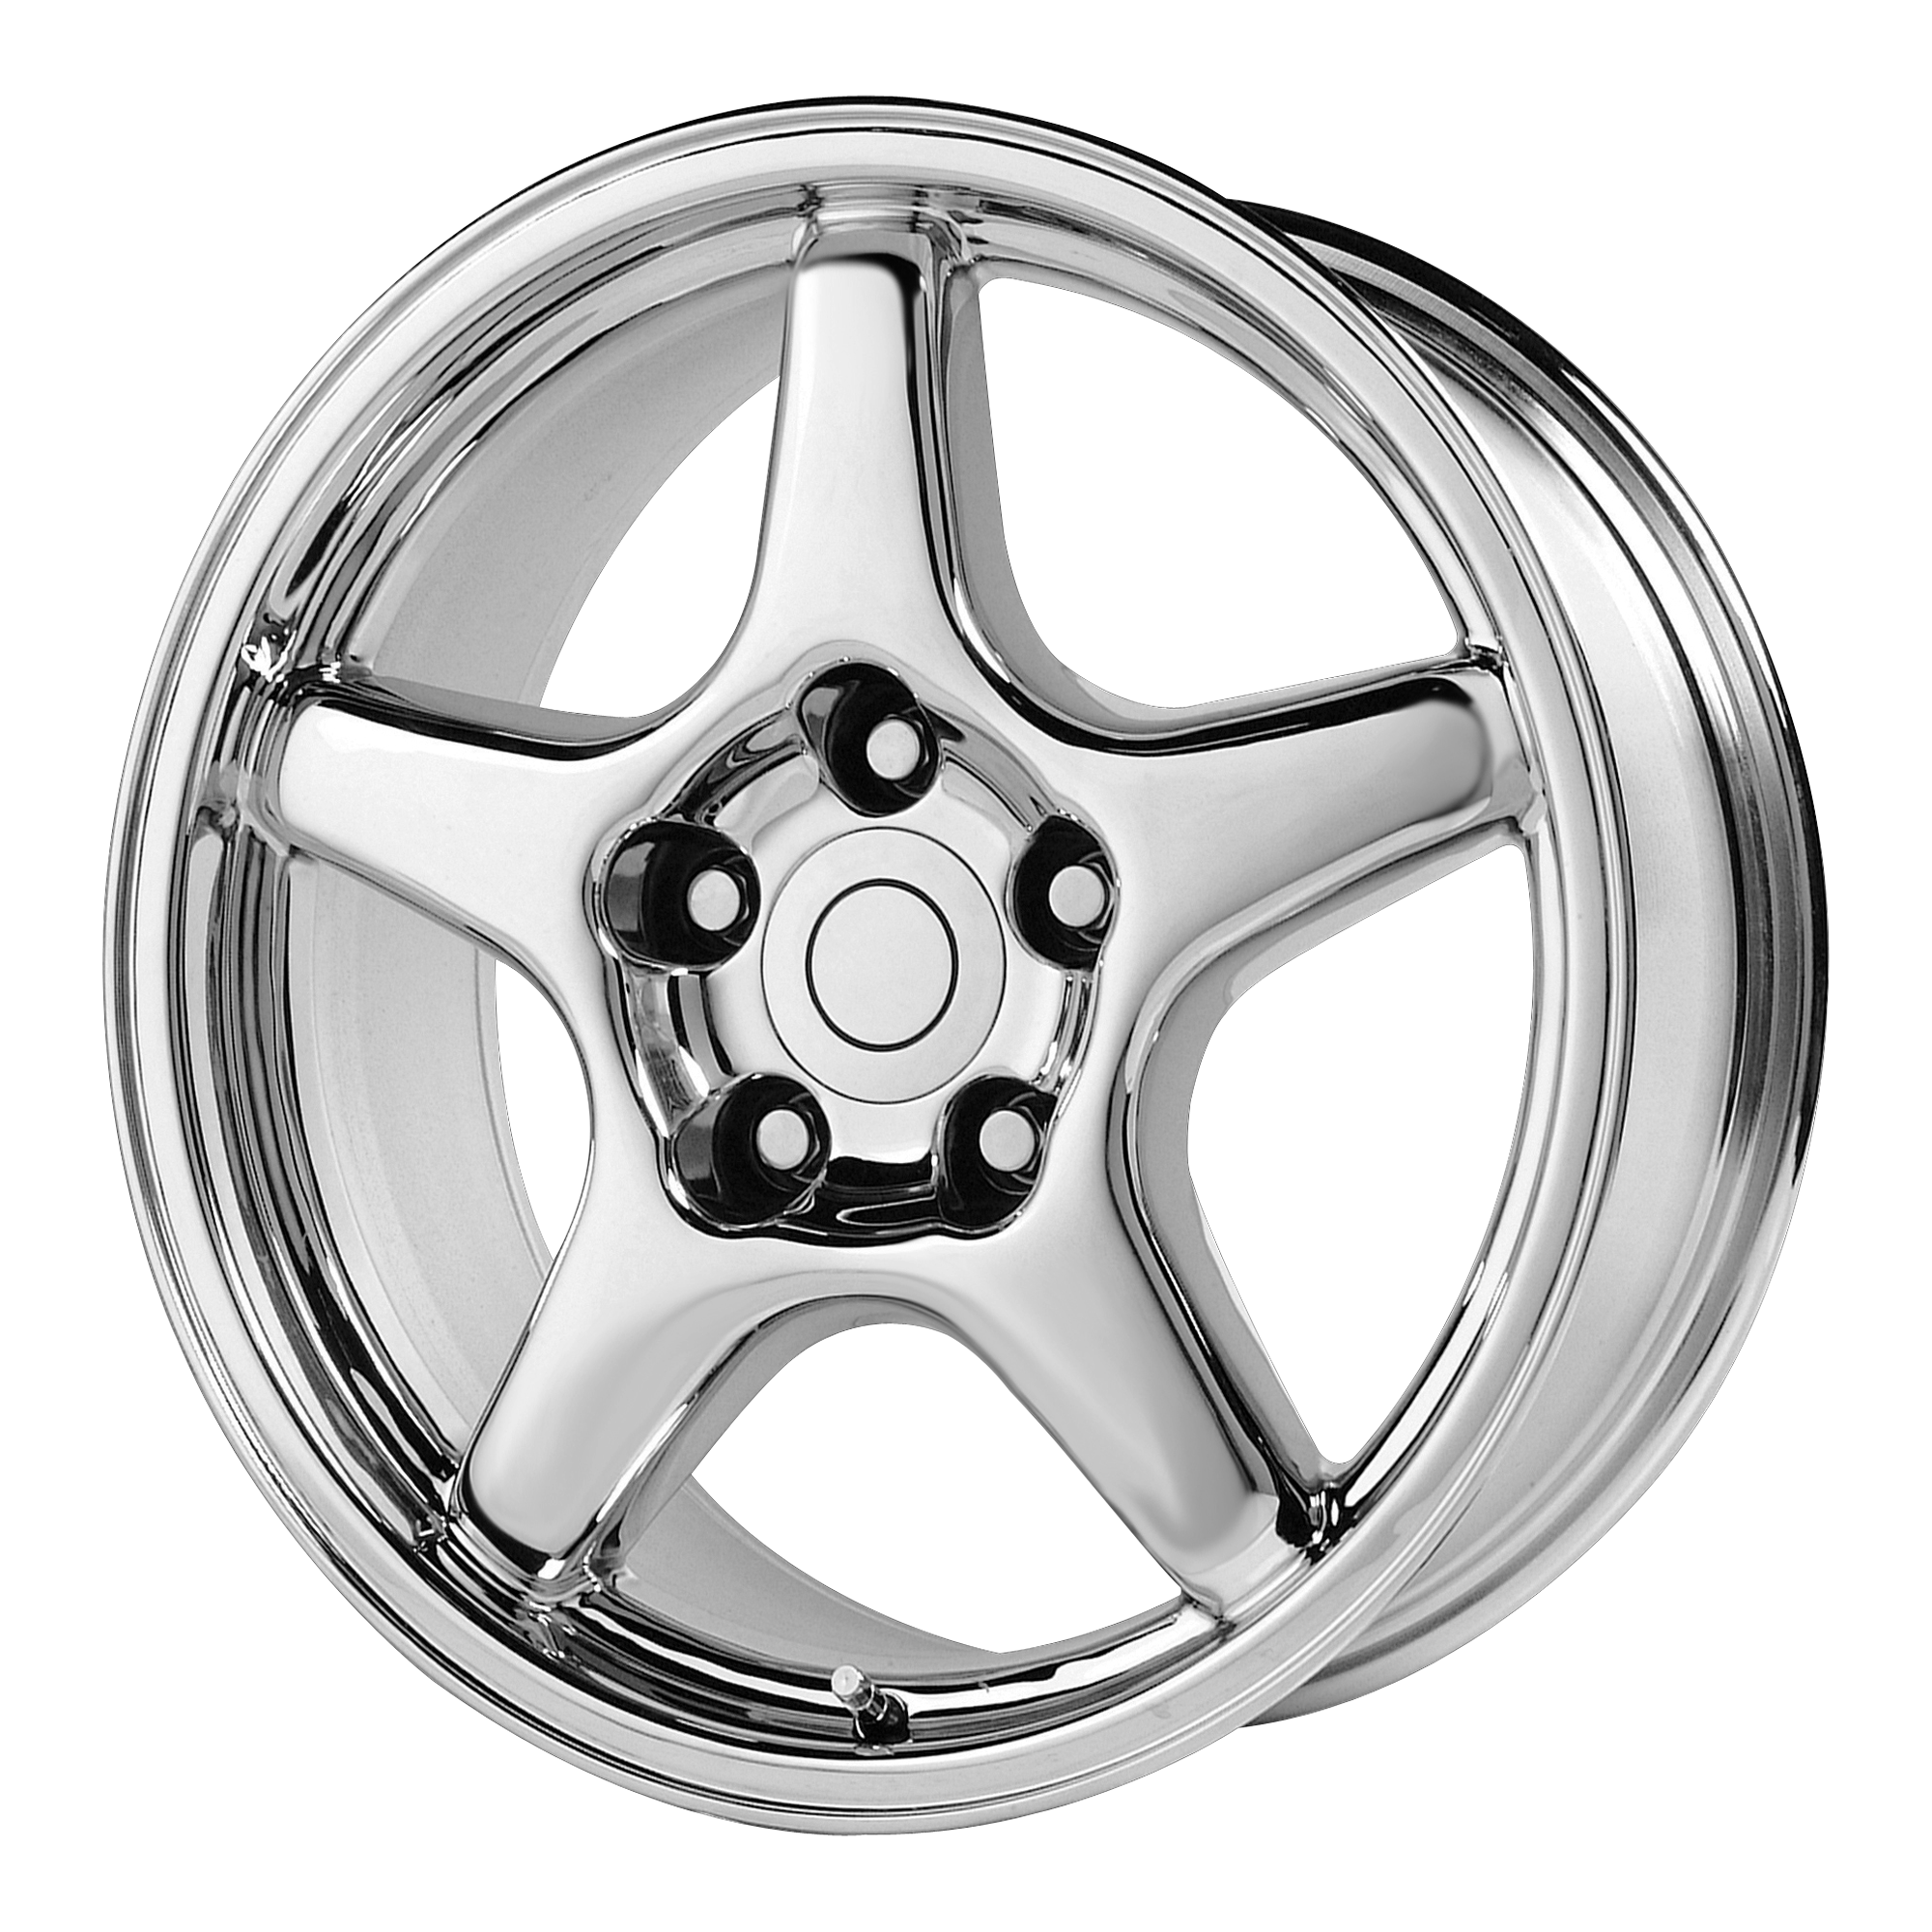 103C 17x9.5 5x120.65 CHROME (38 mm) - Tires and Engine Performance